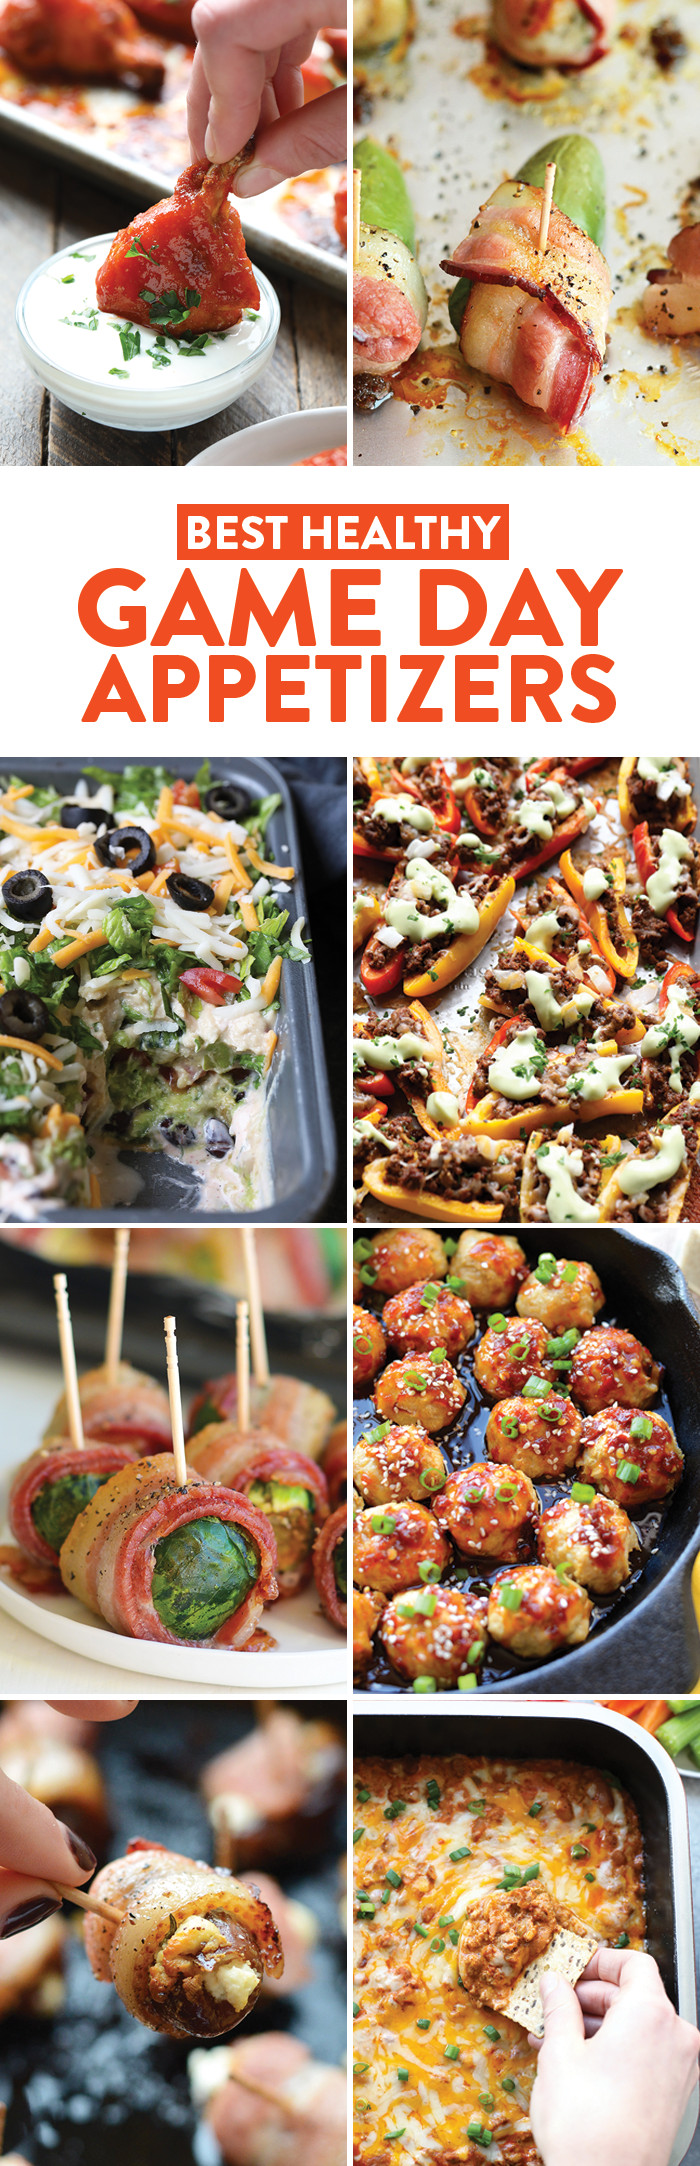 Best Healthy Appetizers
 Best Appetizers for a Healthy Game Day Fit Foo Finds